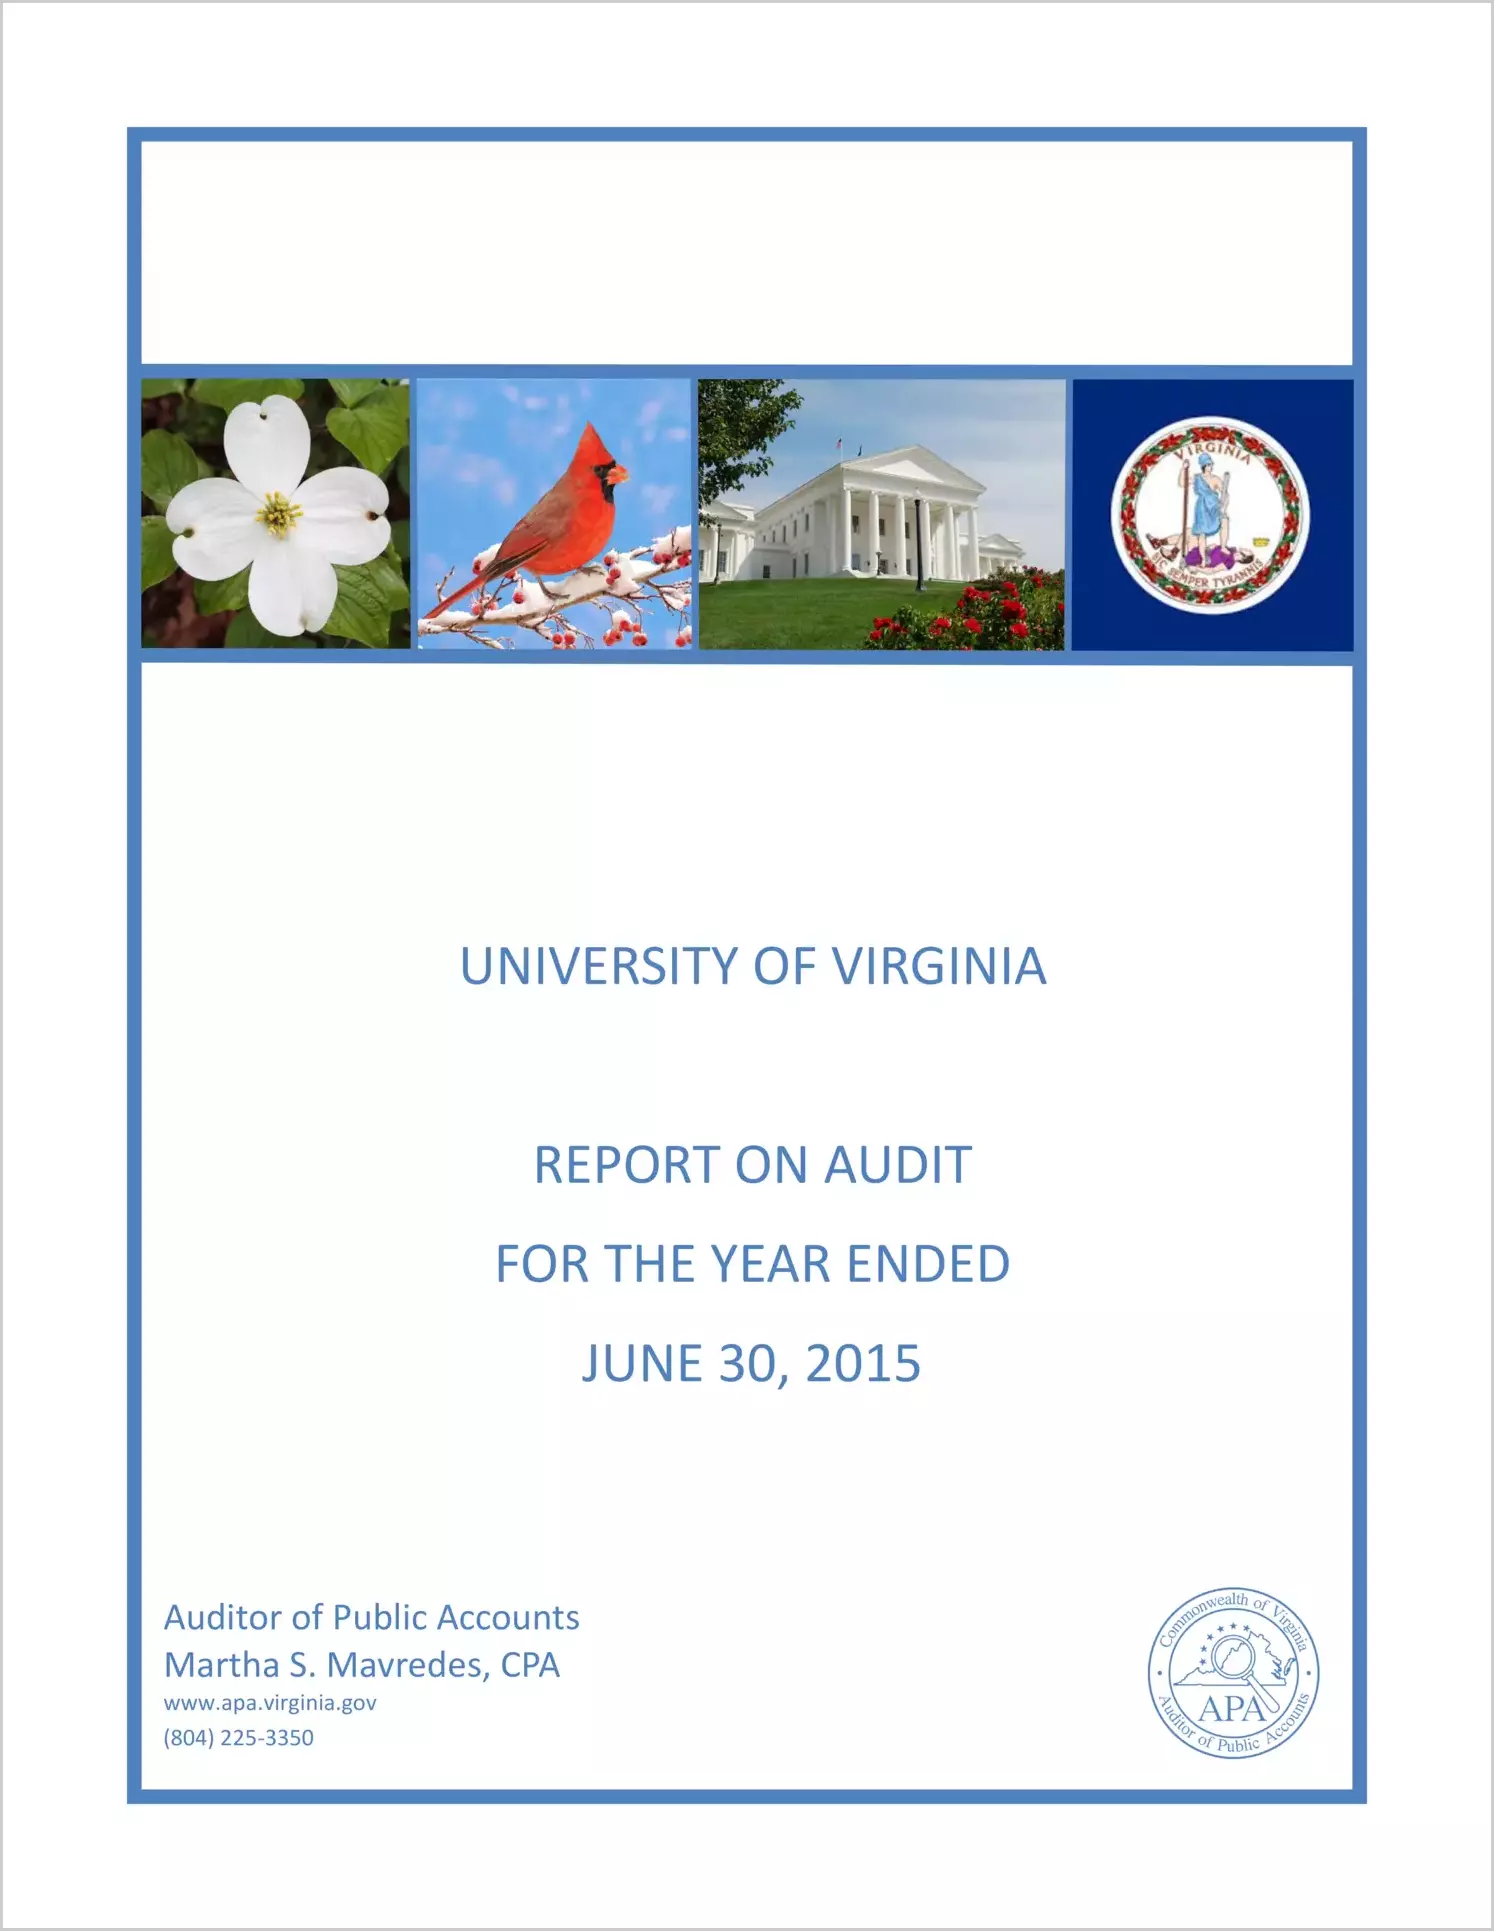 University of Virginia for the year ended June 30, 2015